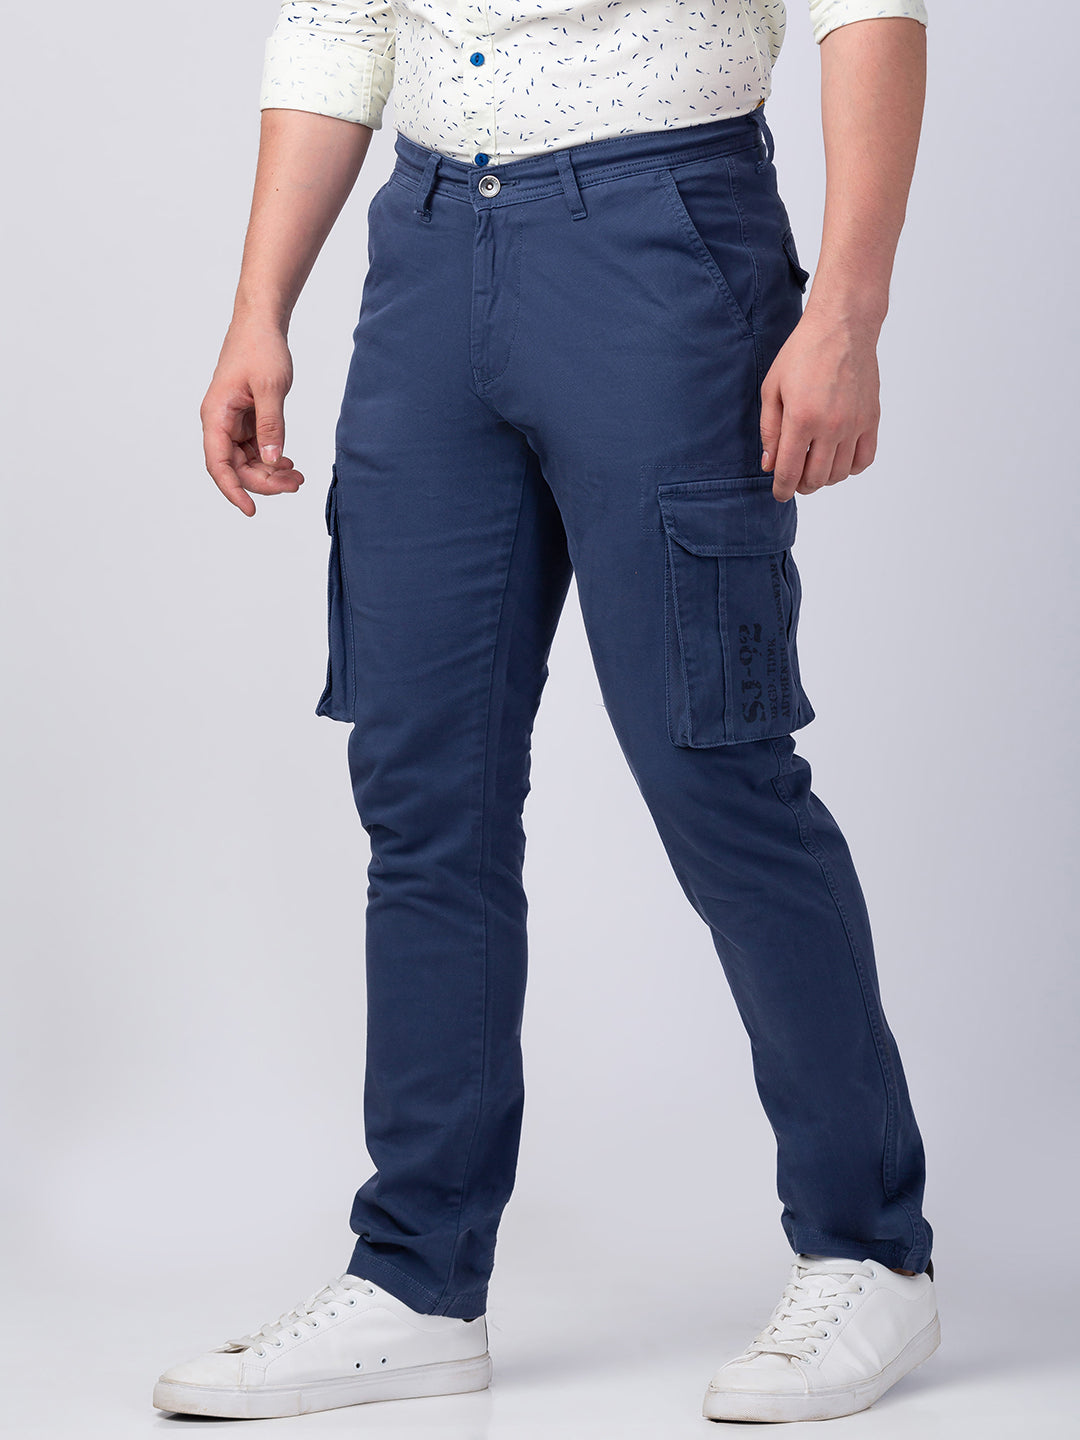 WENKOMG1 Cargo Pants for Men,Solid Slim Fit Casual India | Ubuy